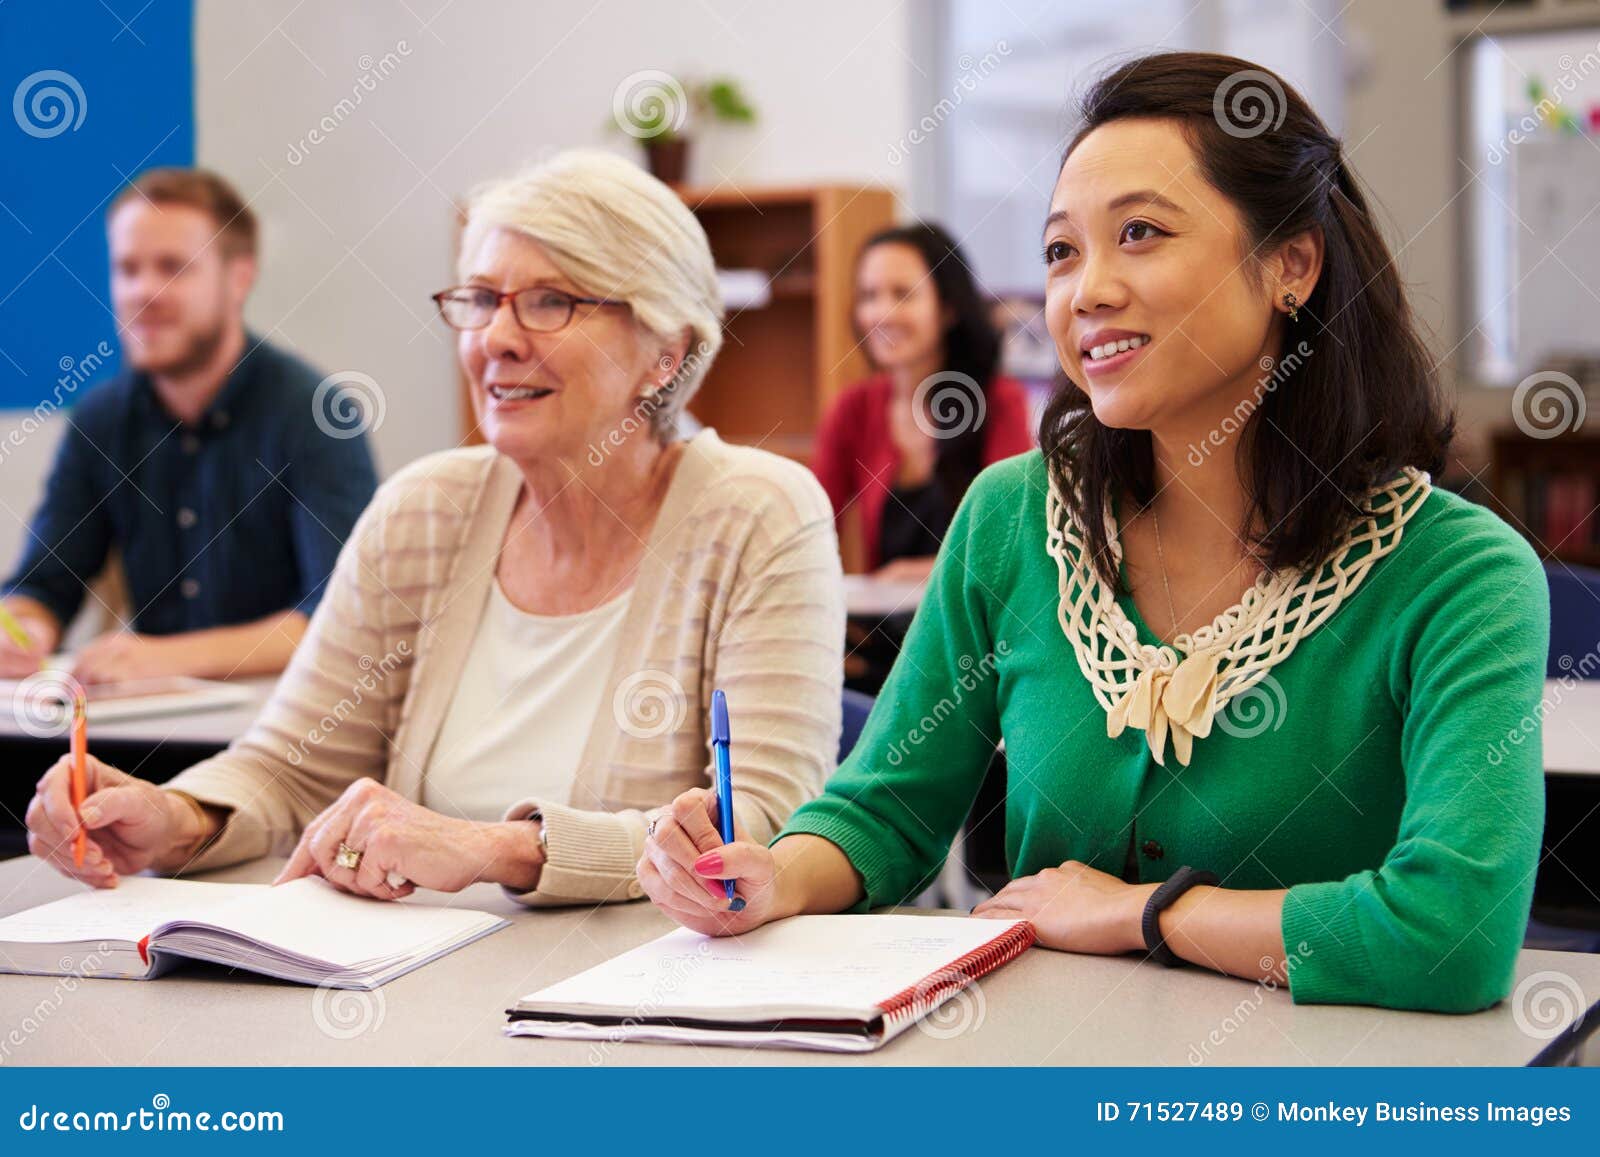 two women sharing a desk at an adult education class look up